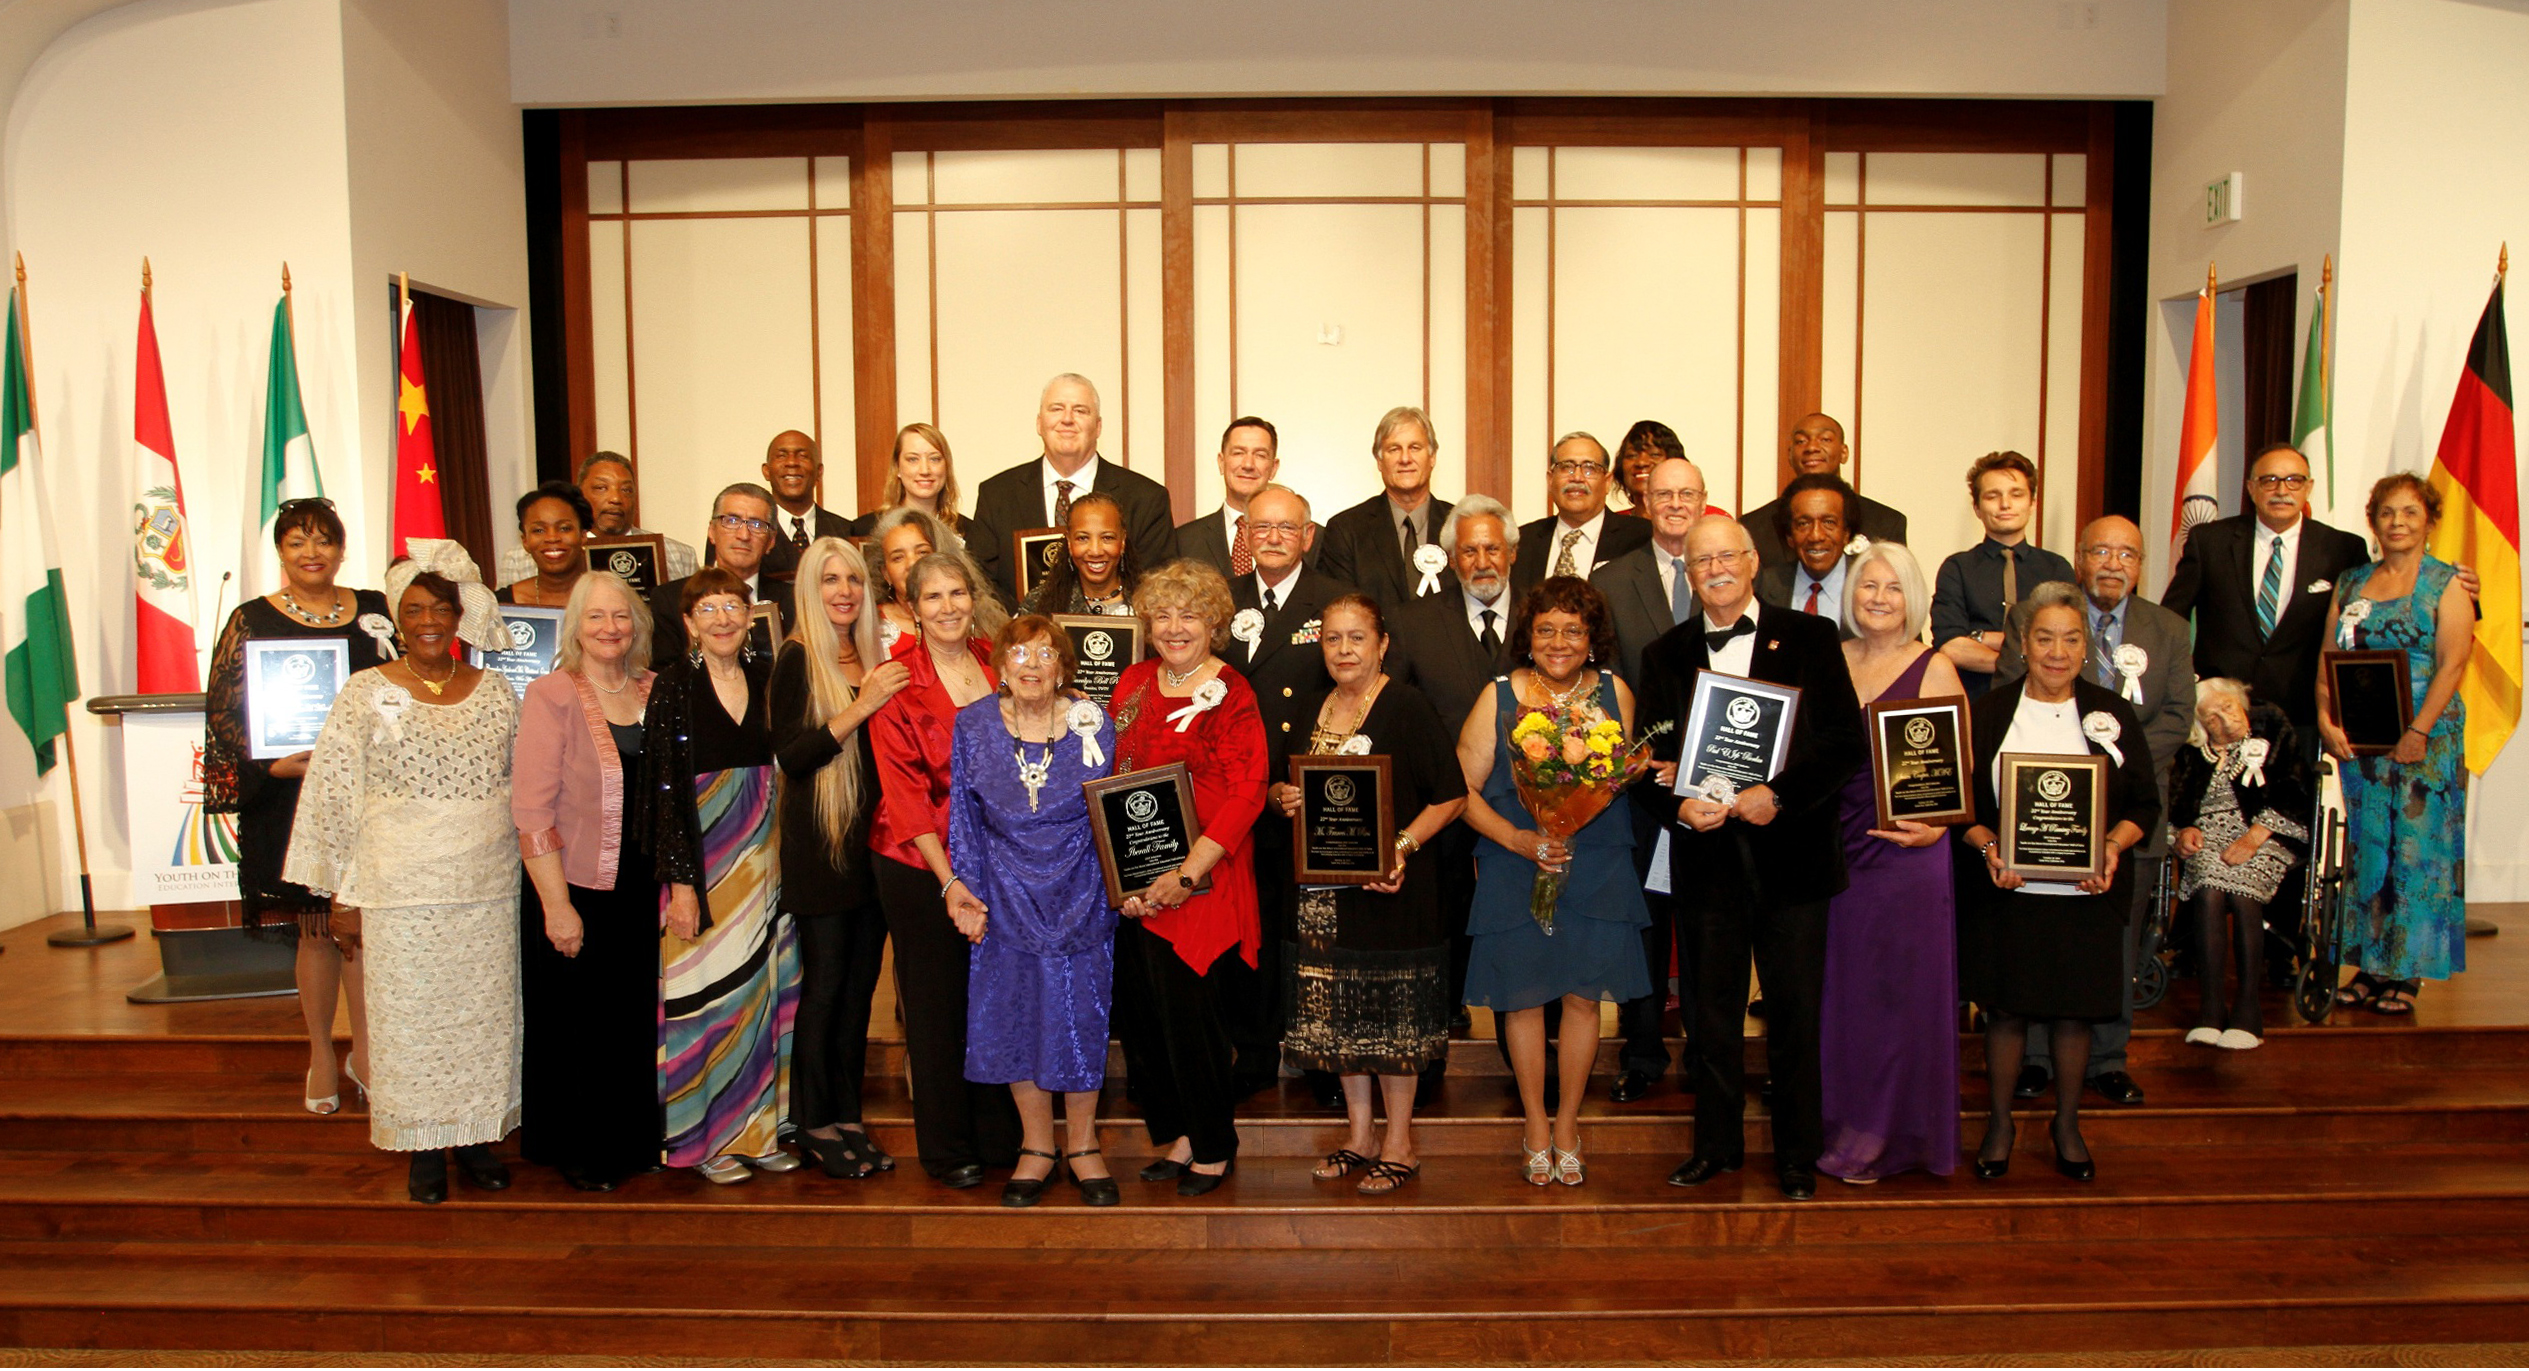 The International Educators' Hall of Fame inducted 28 educators from 6 different nations honoring those who have made significant humanitarian contributions in the field of education.